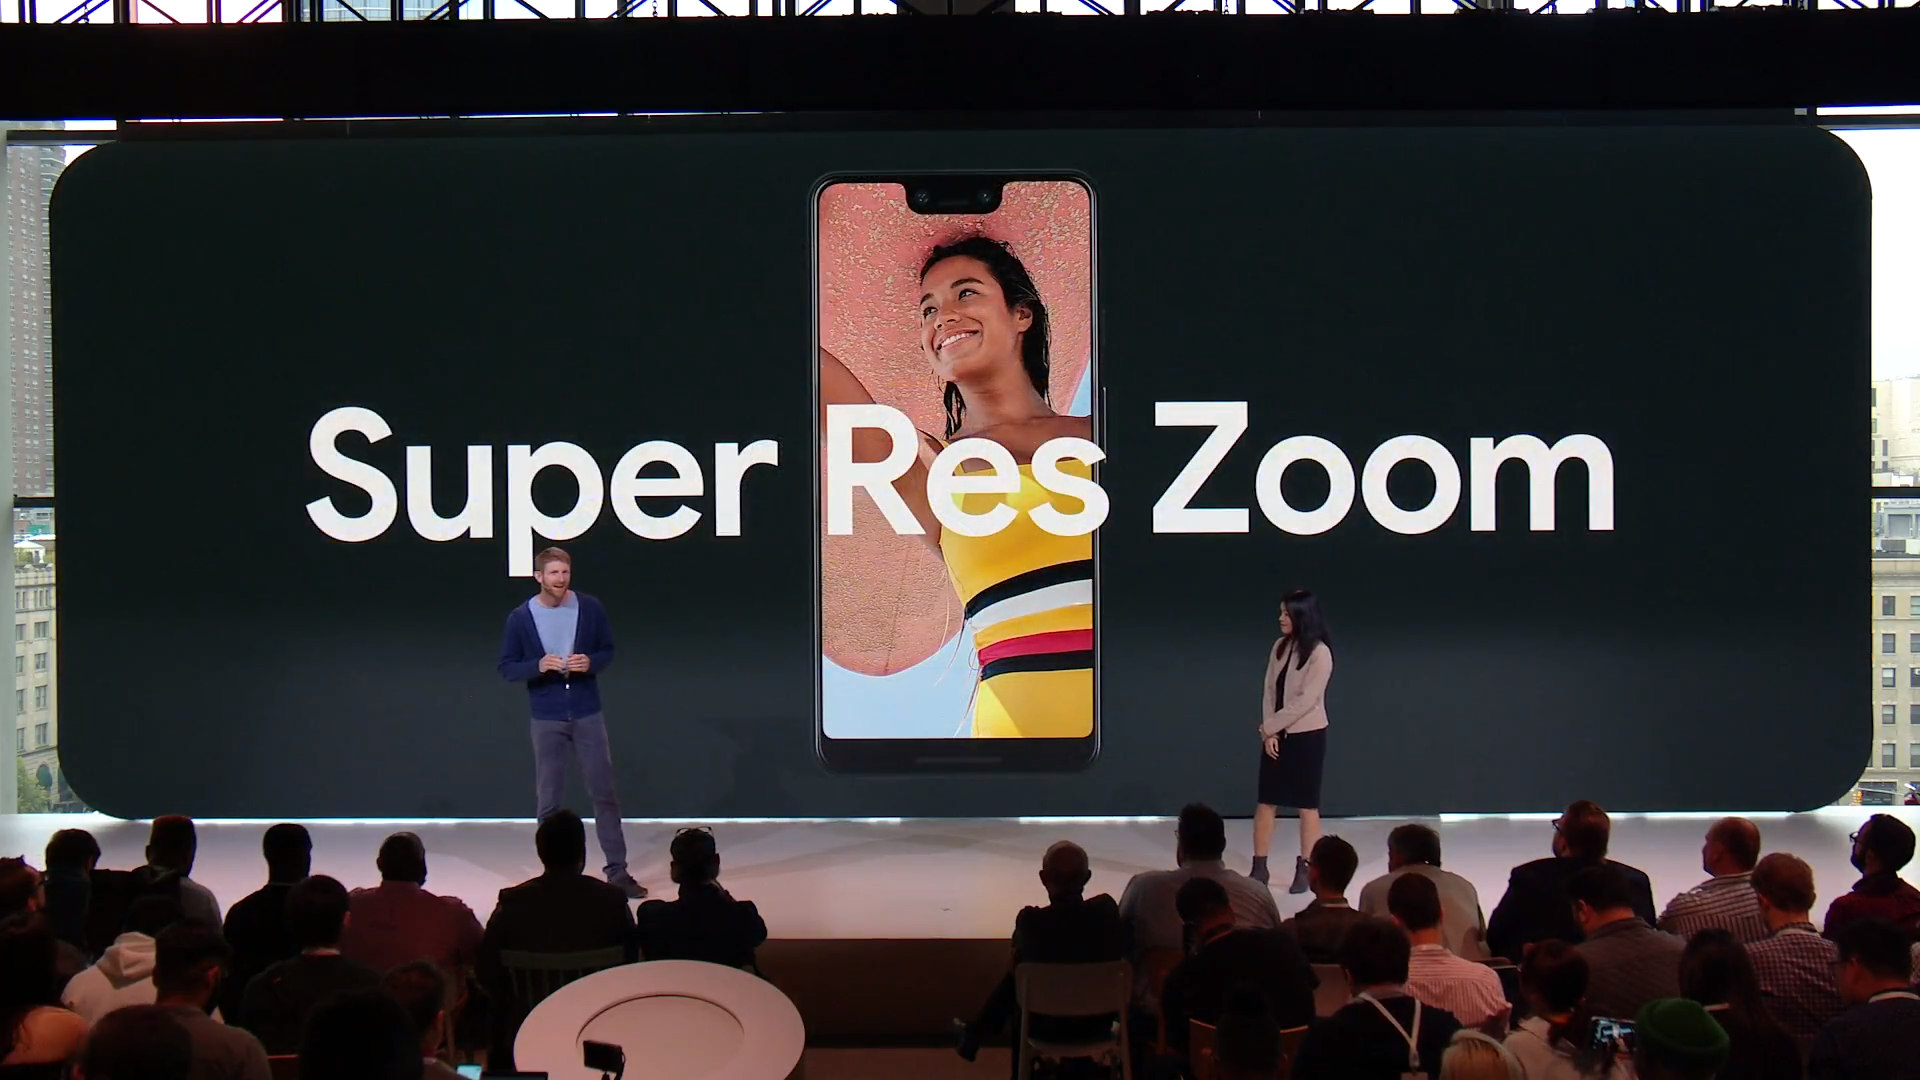 The Super Res Zoom feature on the Google Pixel 3.